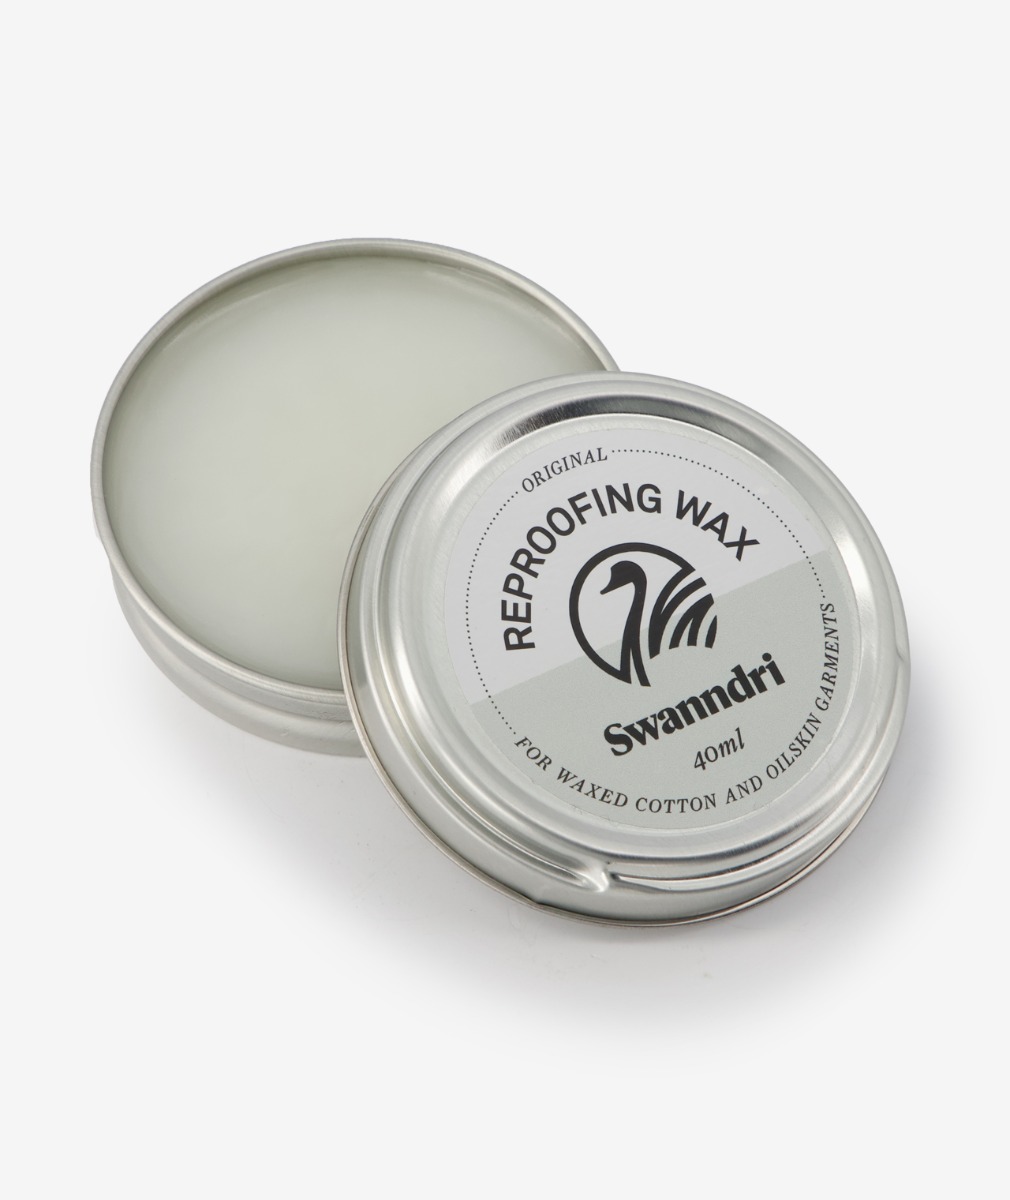 Swanndri Wax Tin for Re-proofing Oilskin Vests and Jackets